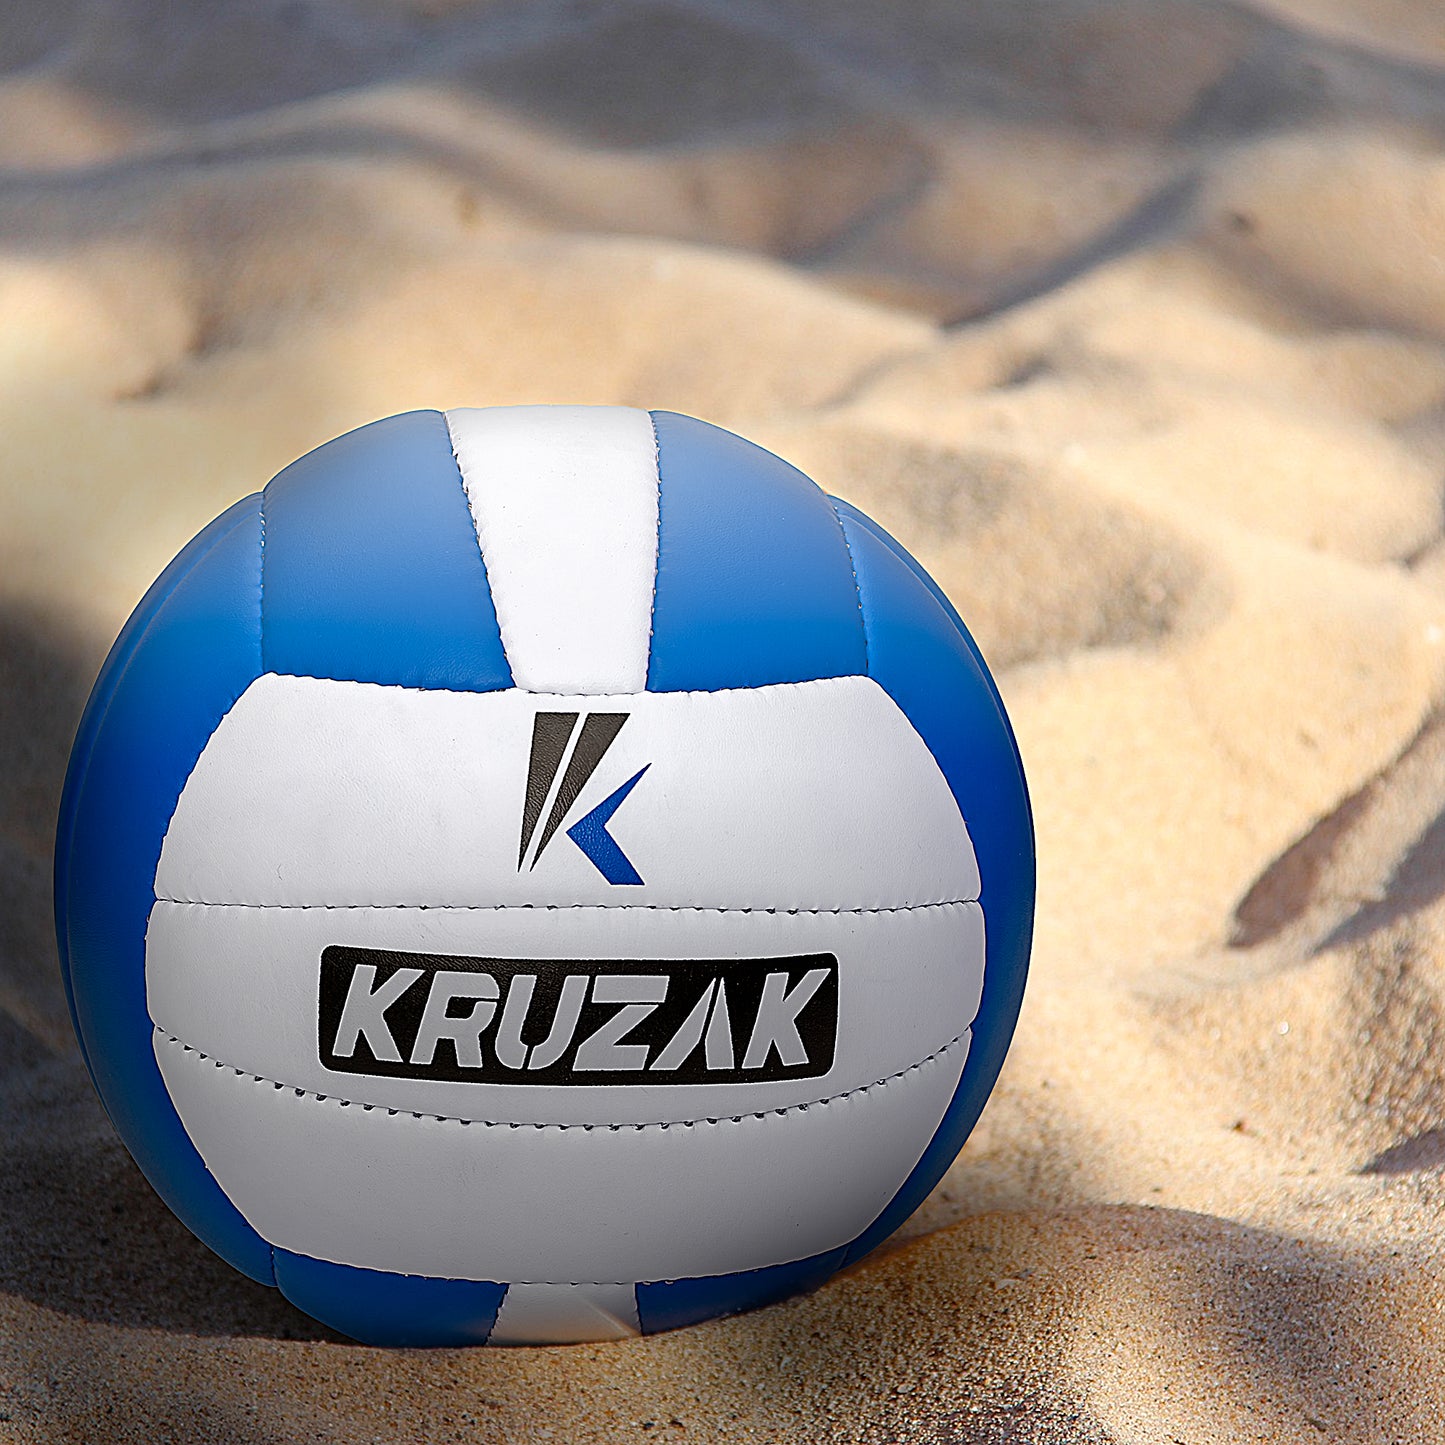 Kruzak Pro Volley Model Hand Stitched BLUE Volley Ball Toy - Indoor Outdoor Beach Ball for Kids Youth Adults, Beginners